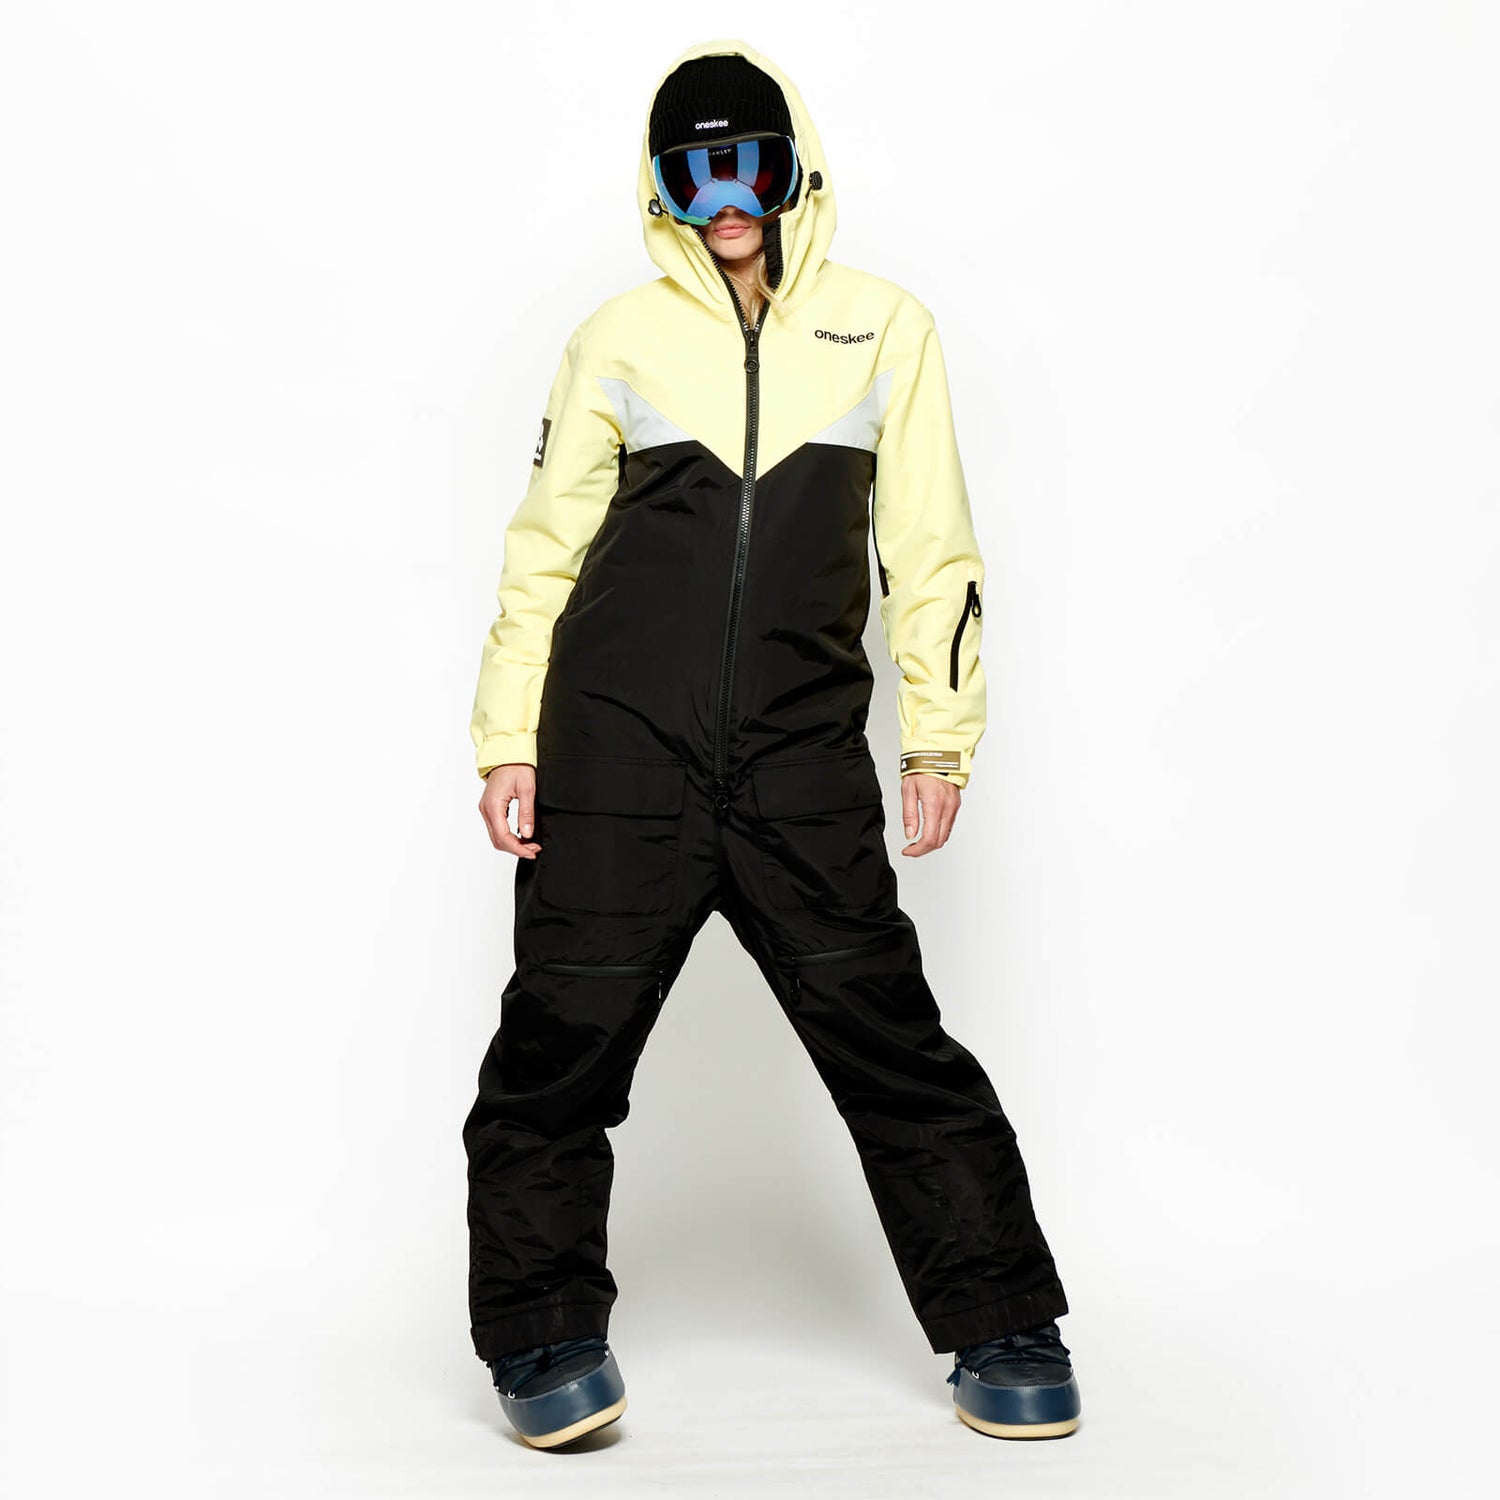 Check out the stunning Women's Mark VI Ski Suit - Black / Yellow oneskee US